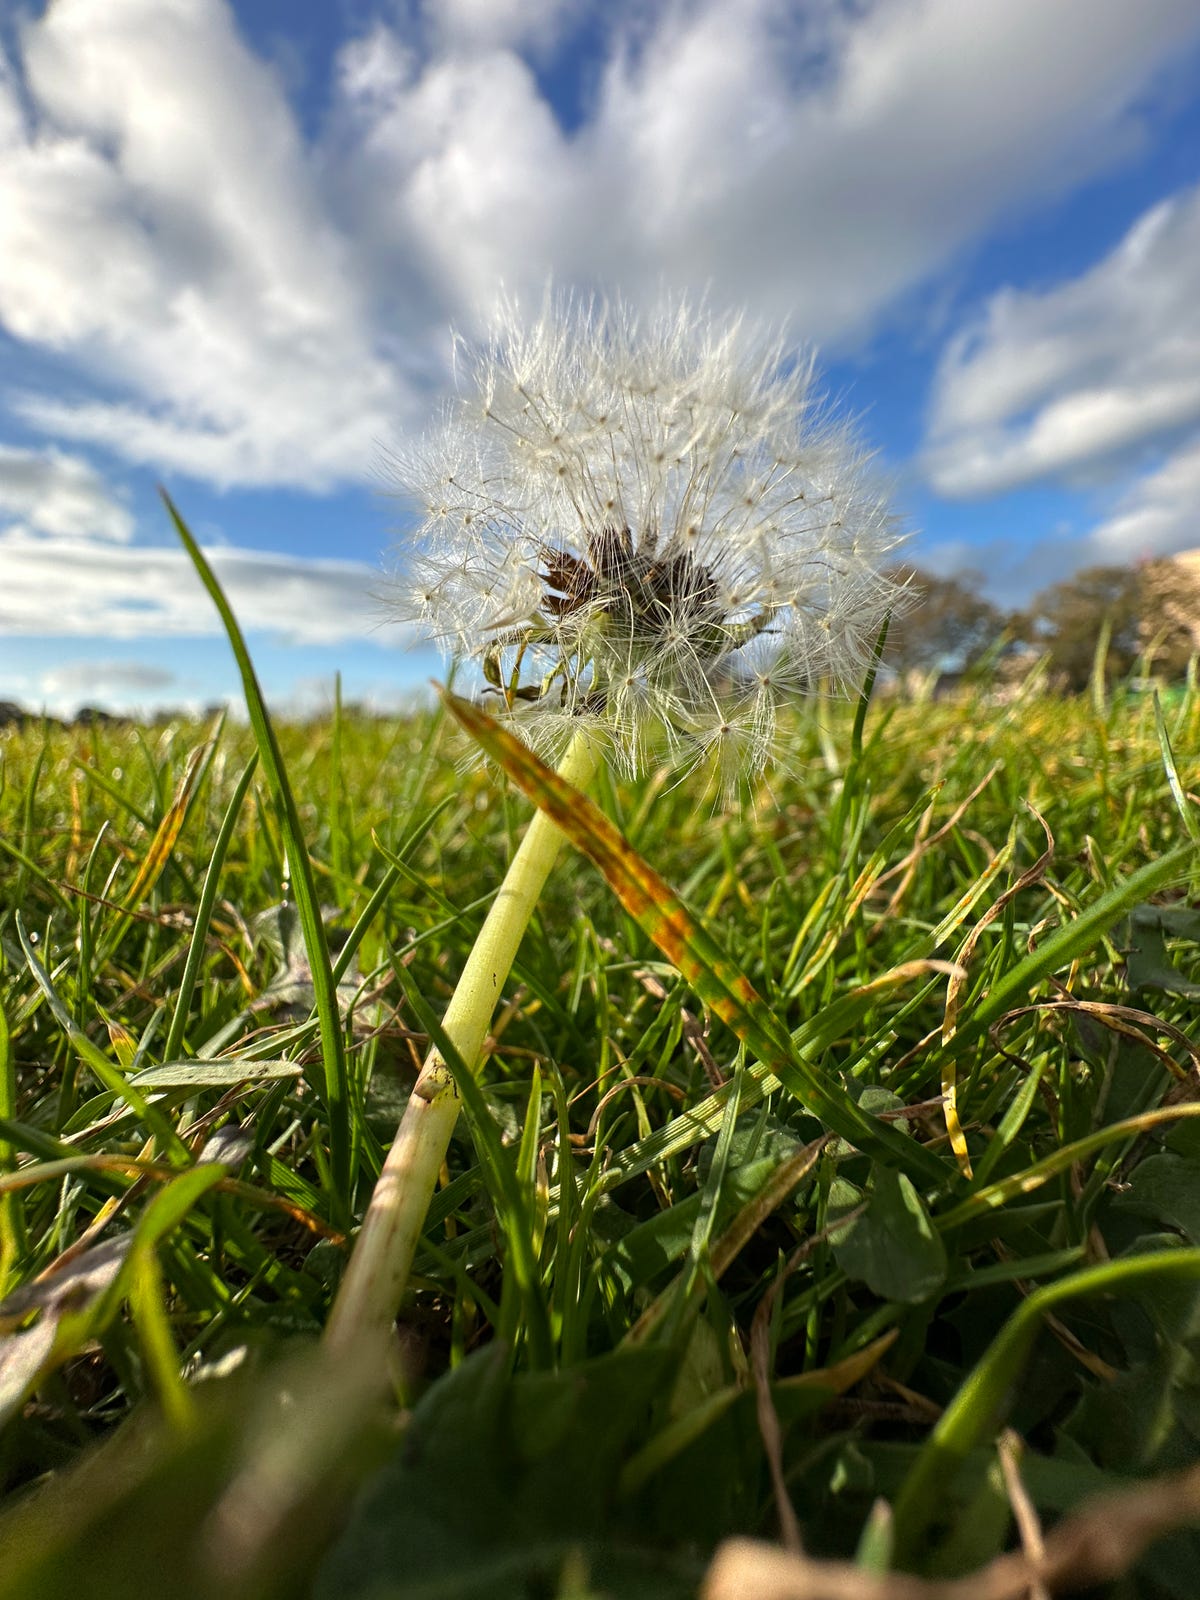 A close up image of a dandelion in grass with a cloudy blue sky behind.